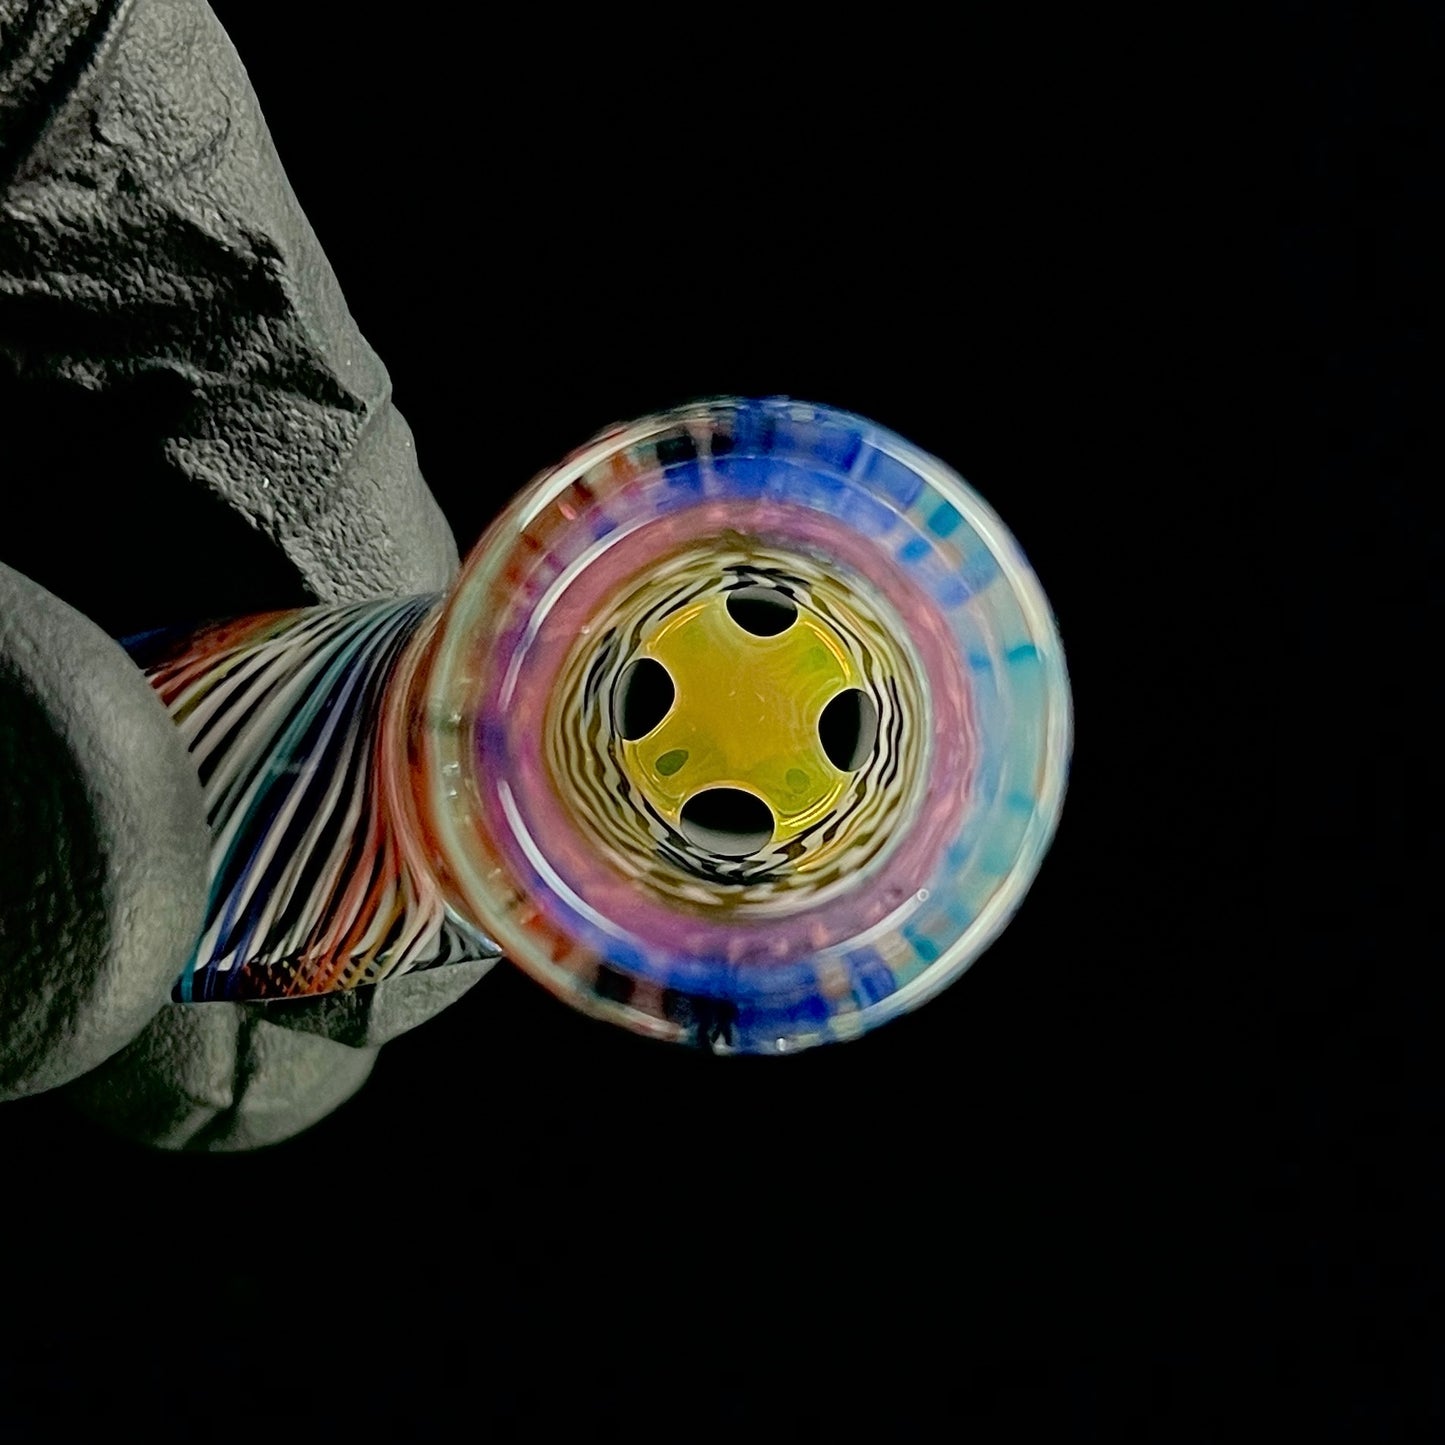 18mm Fire & Ice Hypnotech slide by Jared Wetmore